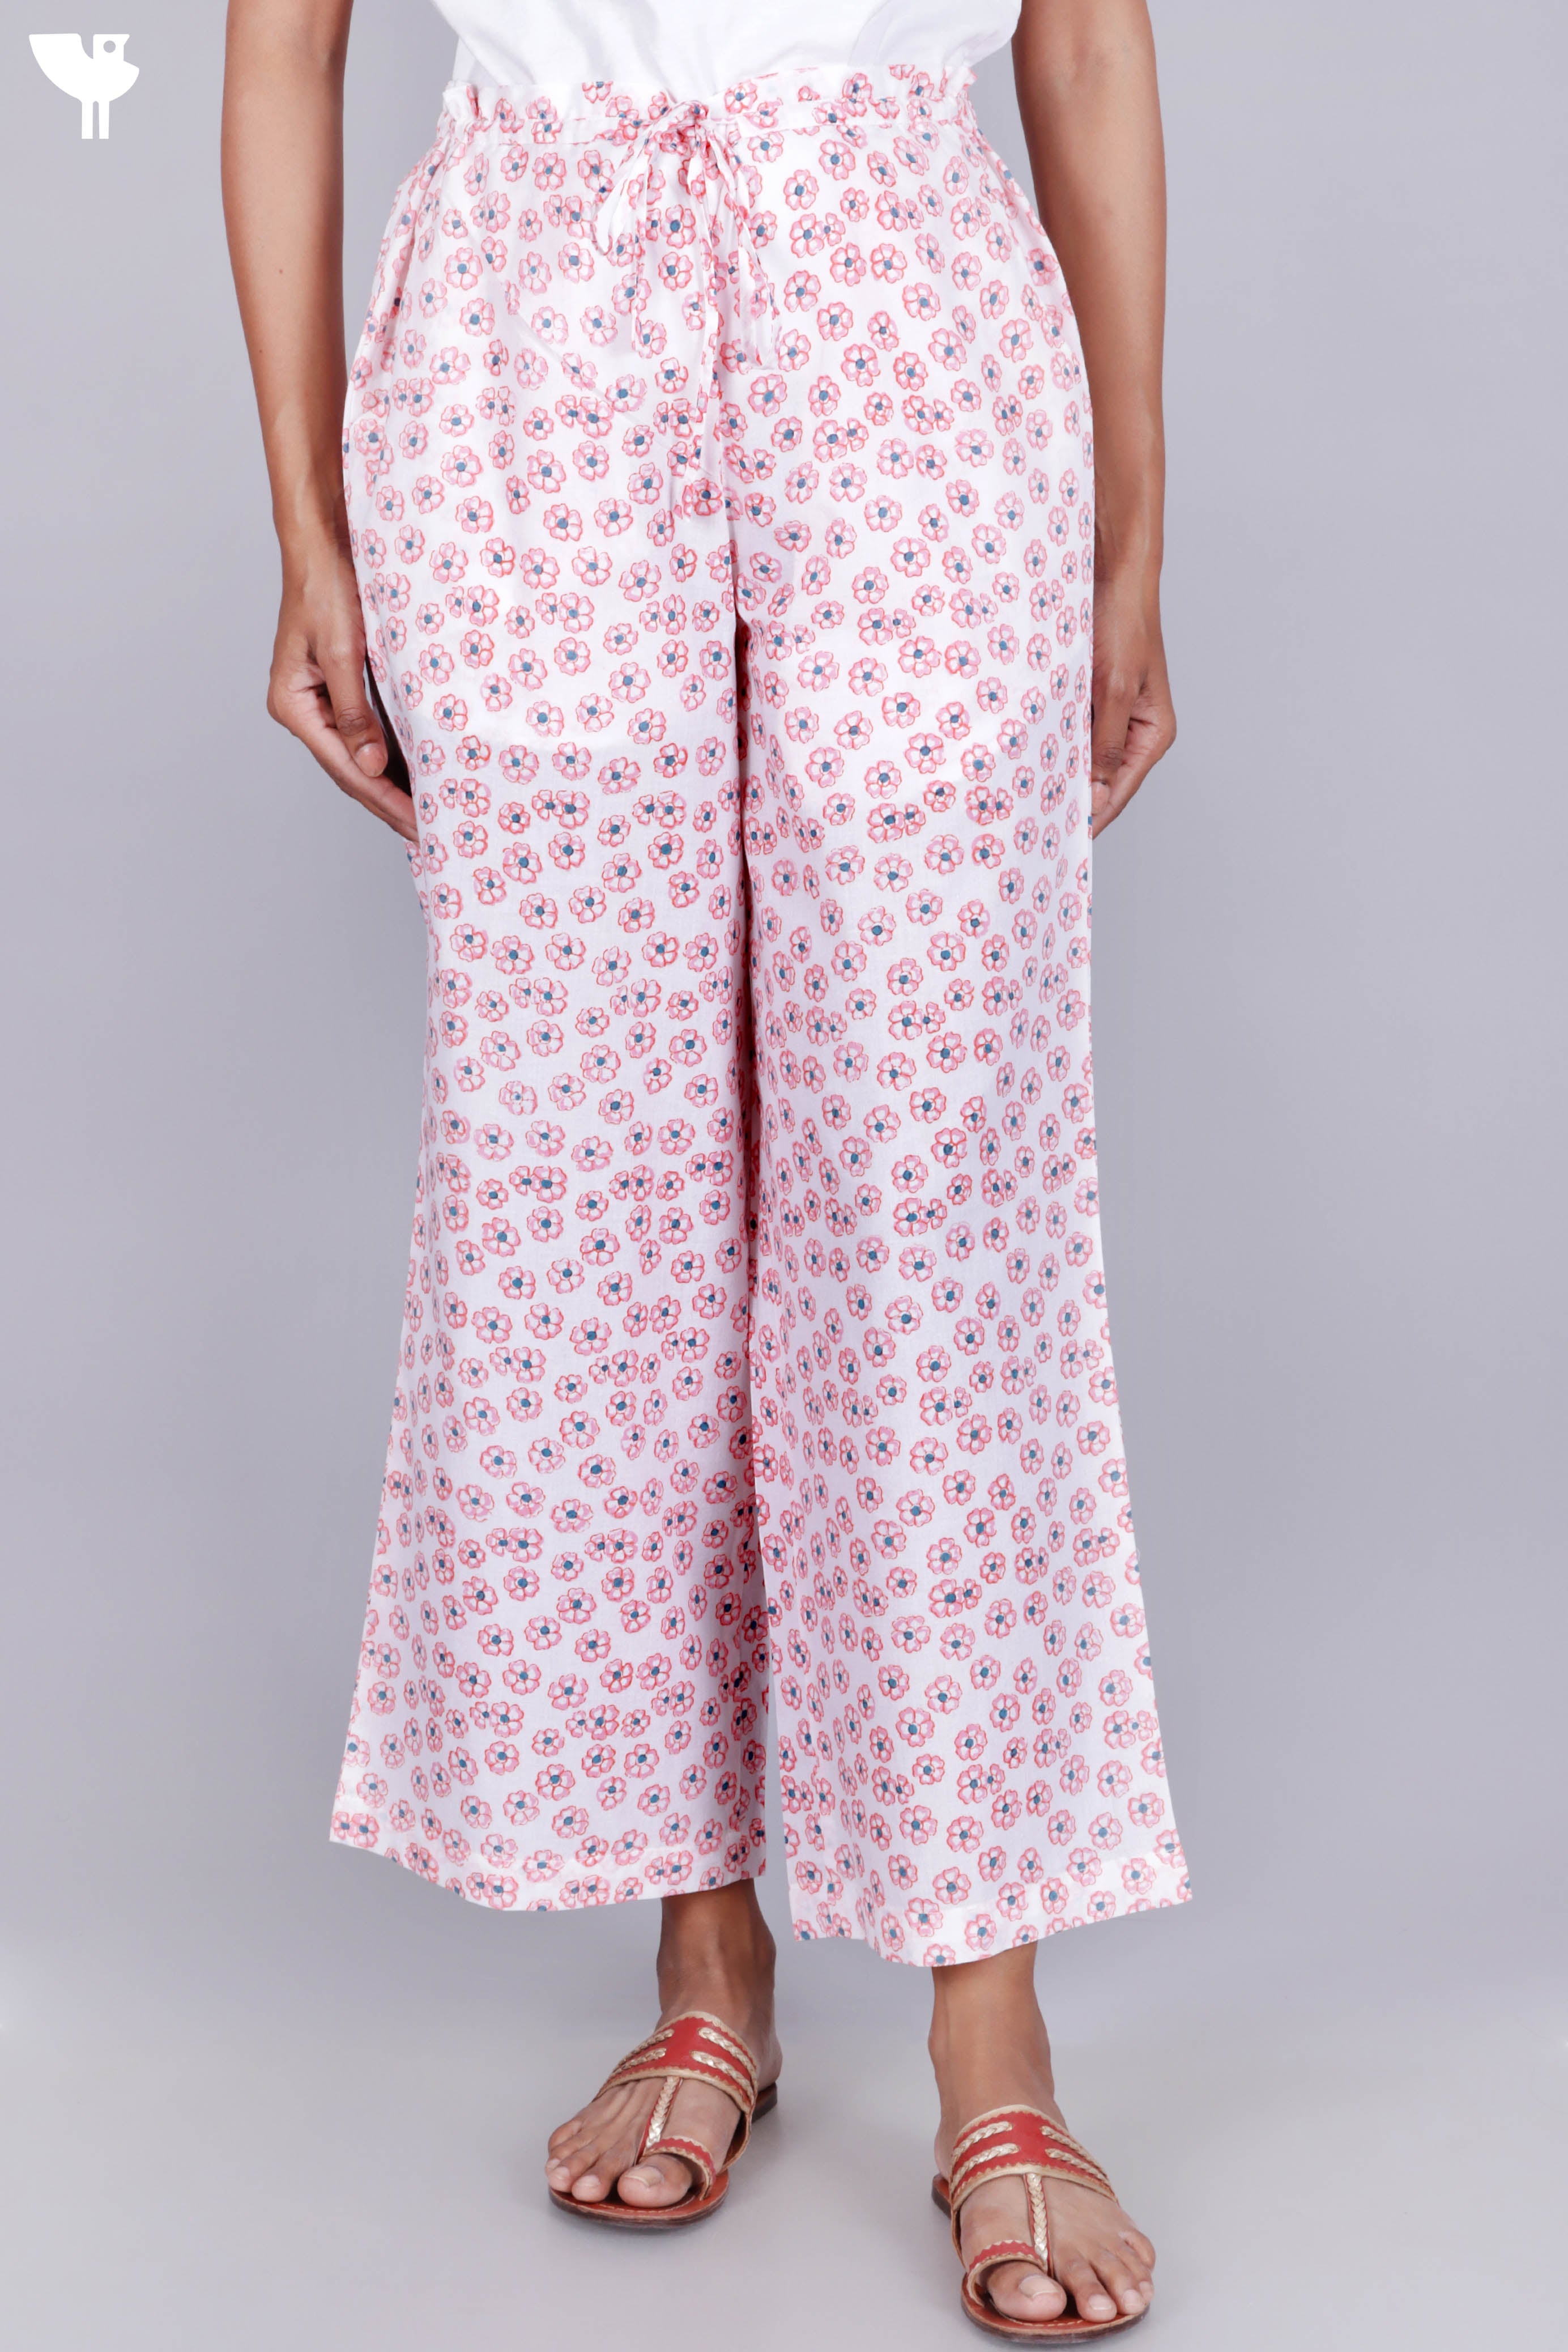 Buy Black High Rise Floral Pants For Women Online in India  VeroModa